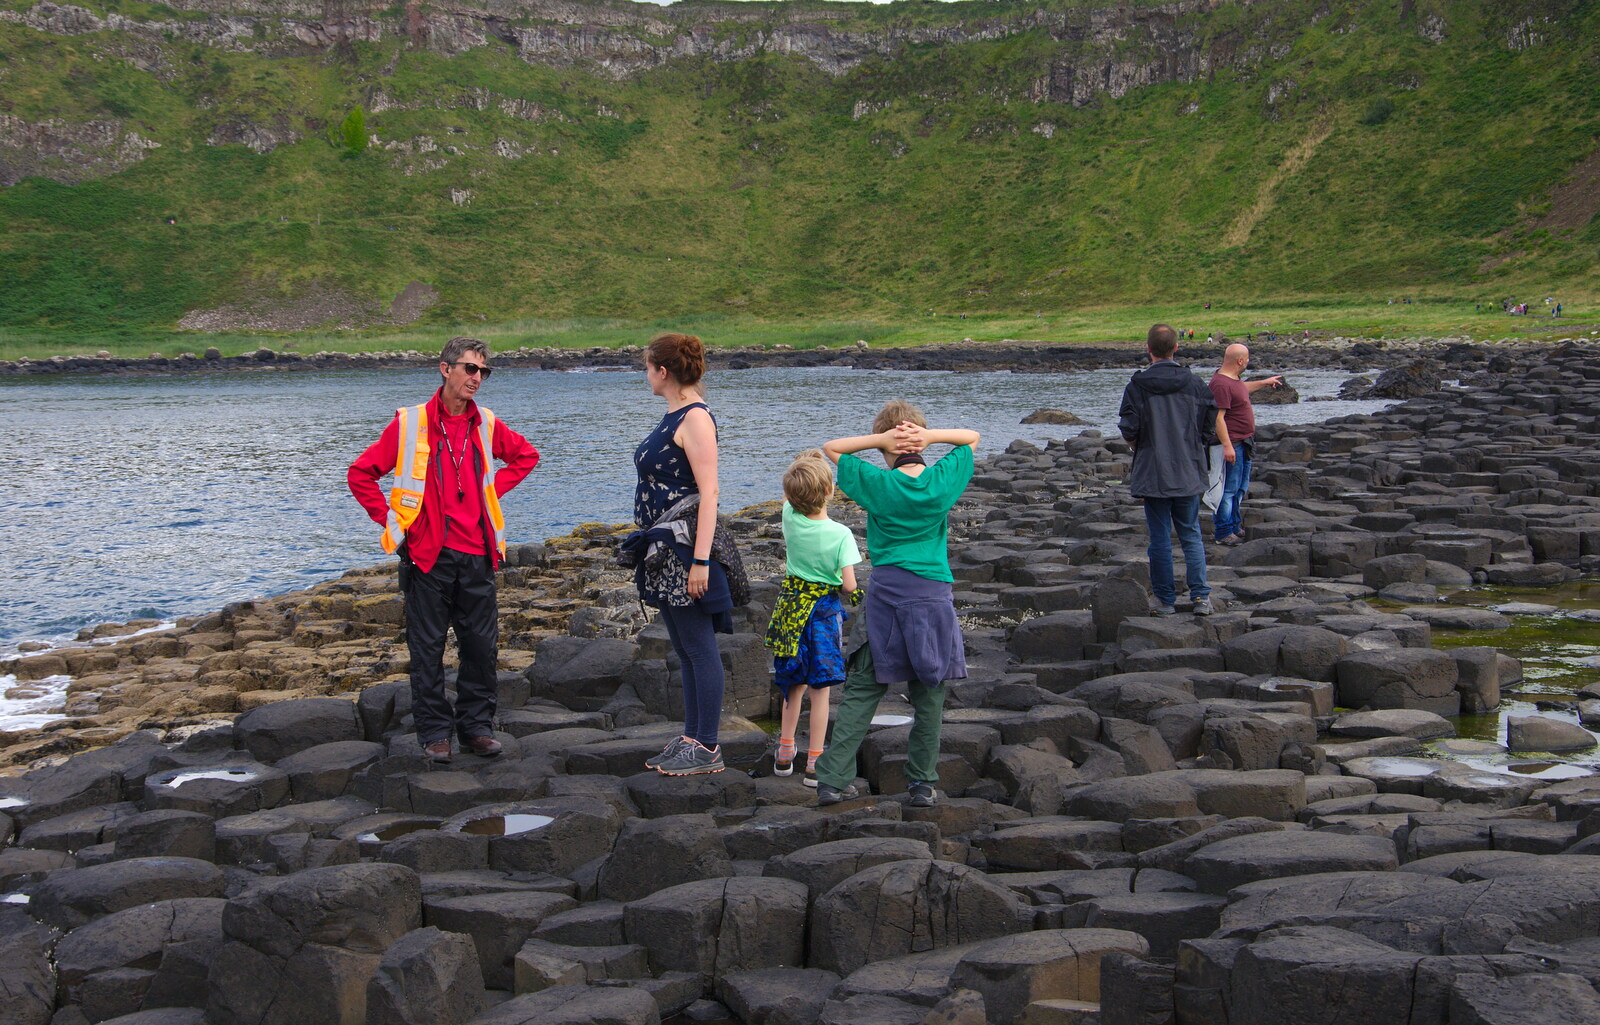 Isobel chats to one of the ranger types from The Giant's Causeway, Bushmills, County Antrim, Northern Ireland - 14th August 2019